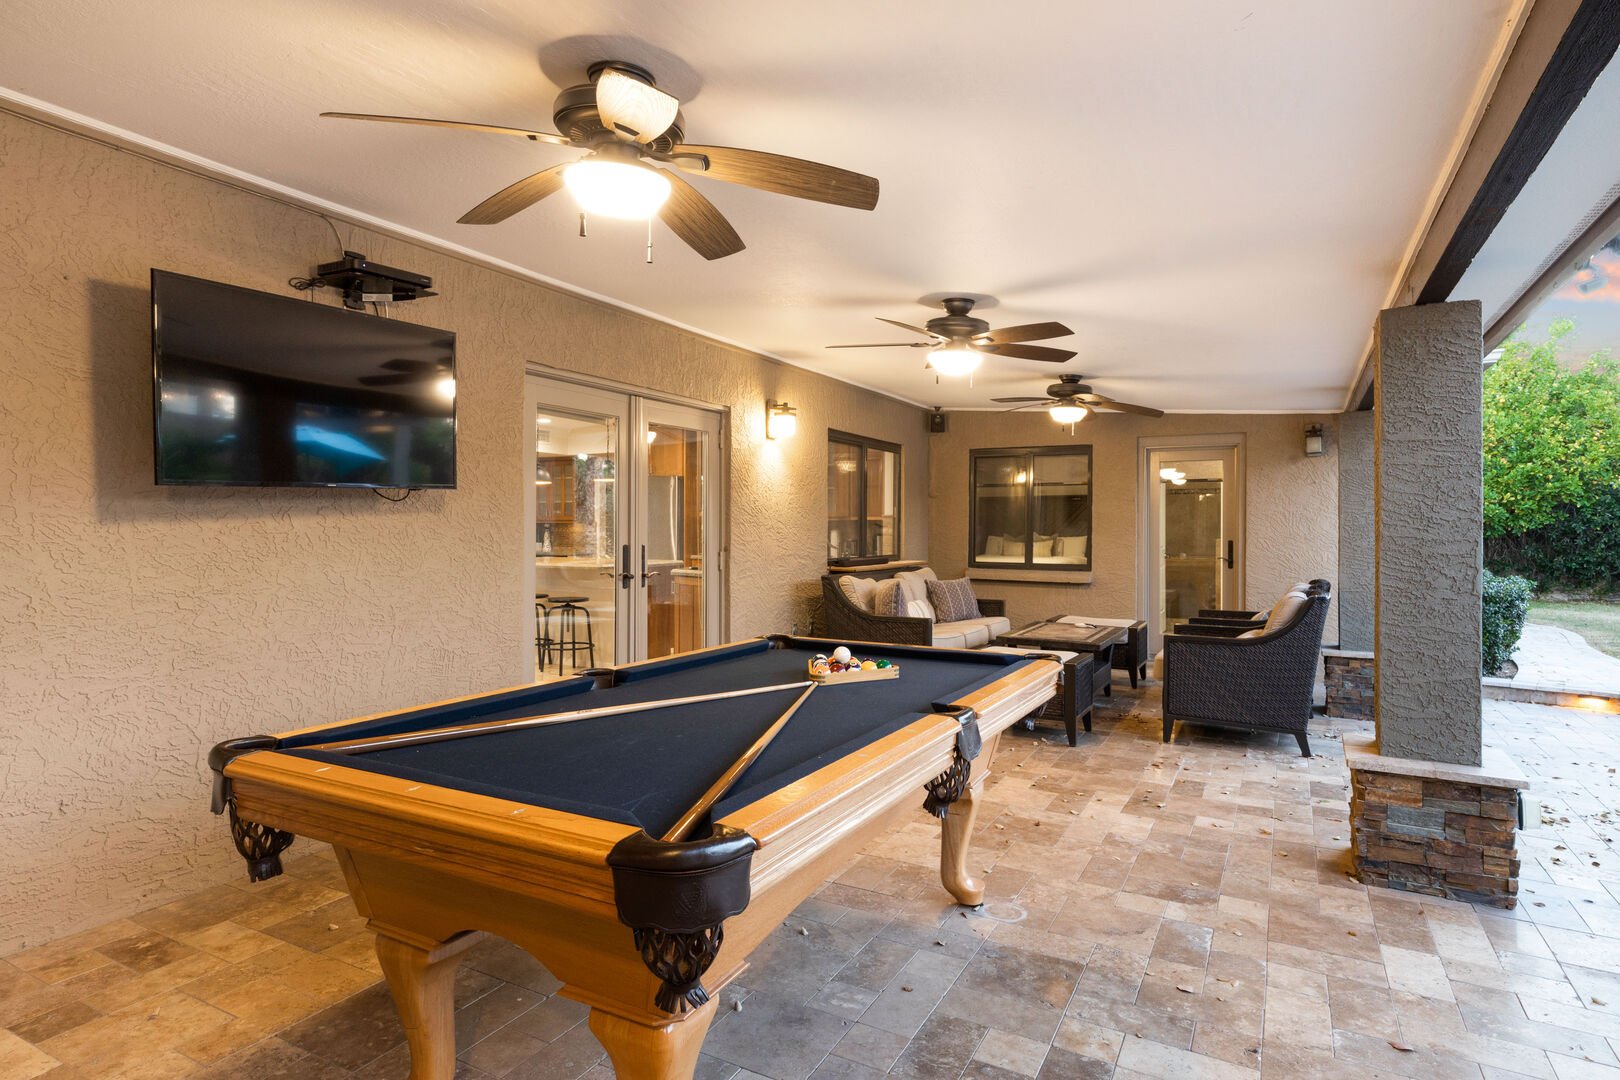 Sheltered Outdoor Entertainment Area w/ Seating, Pool Table & Mounted TV